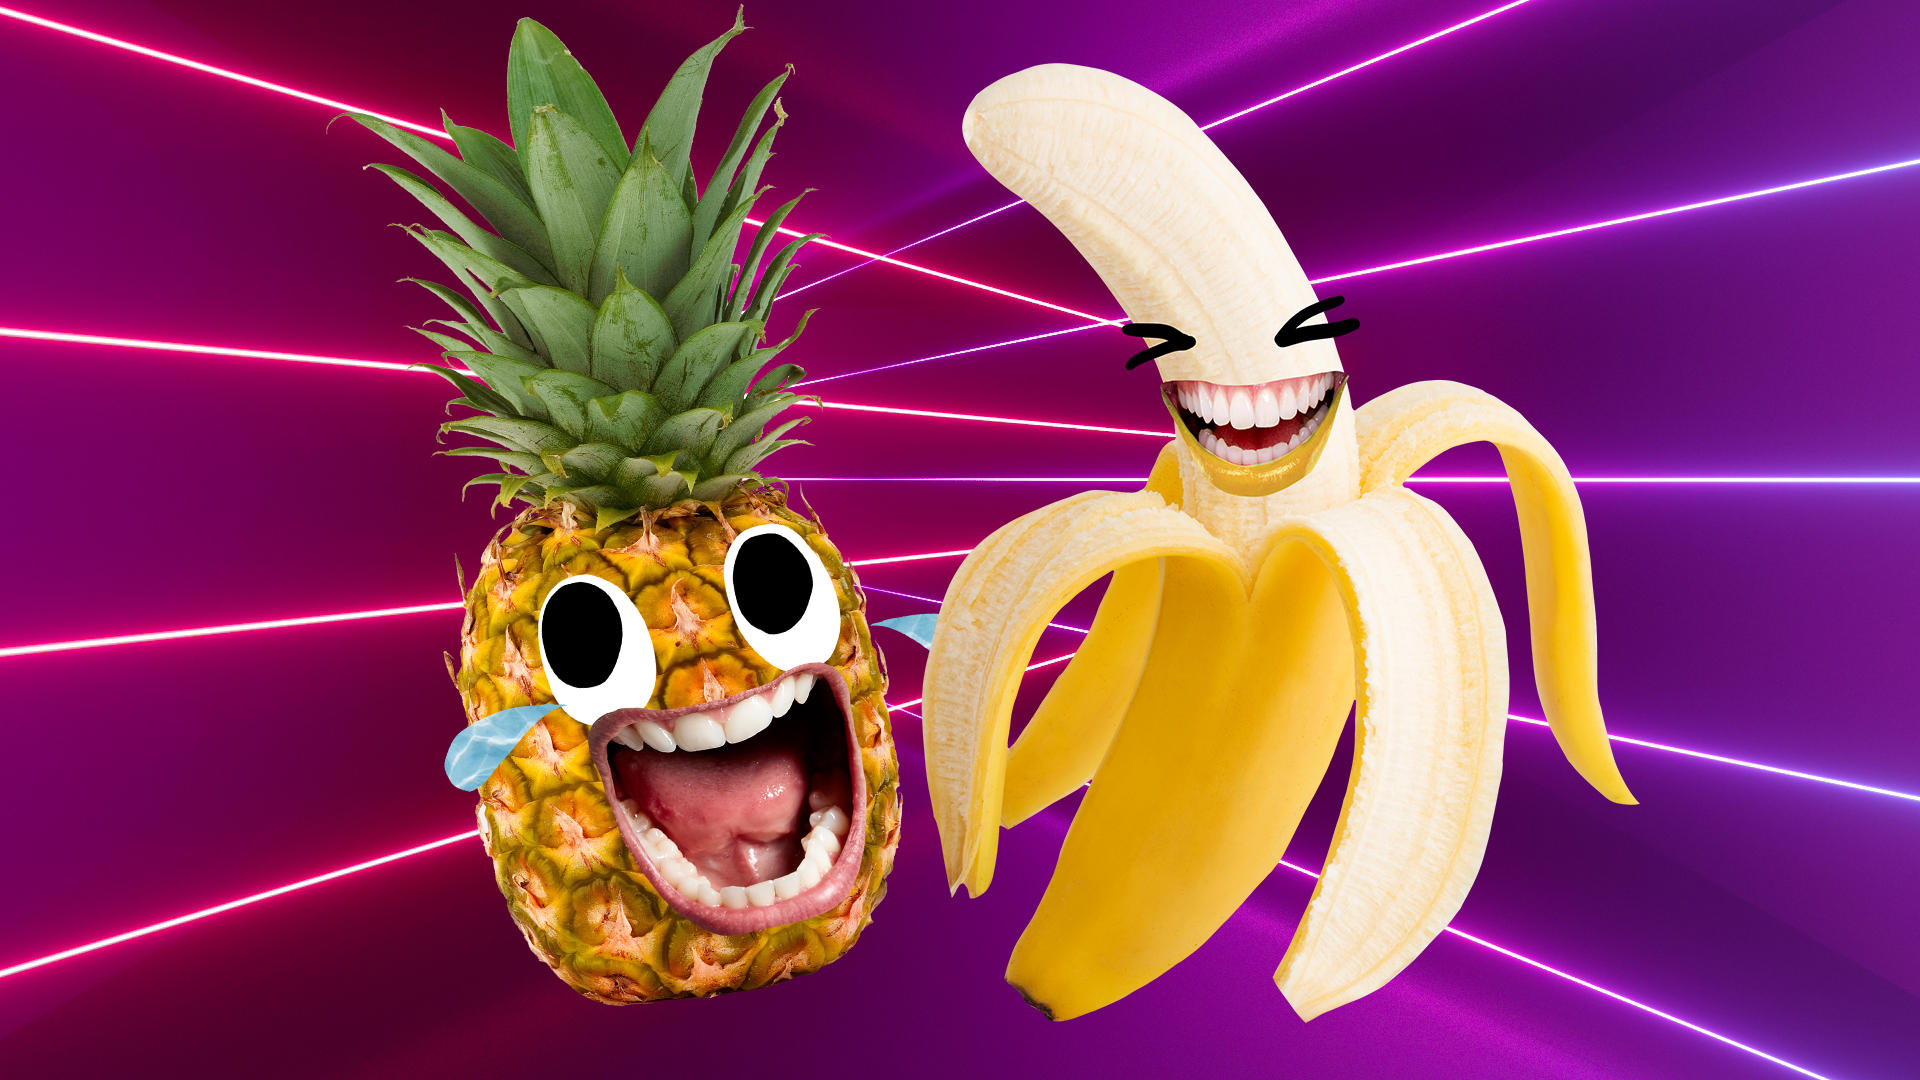 A cry laughing pineapple and and a laughing banana